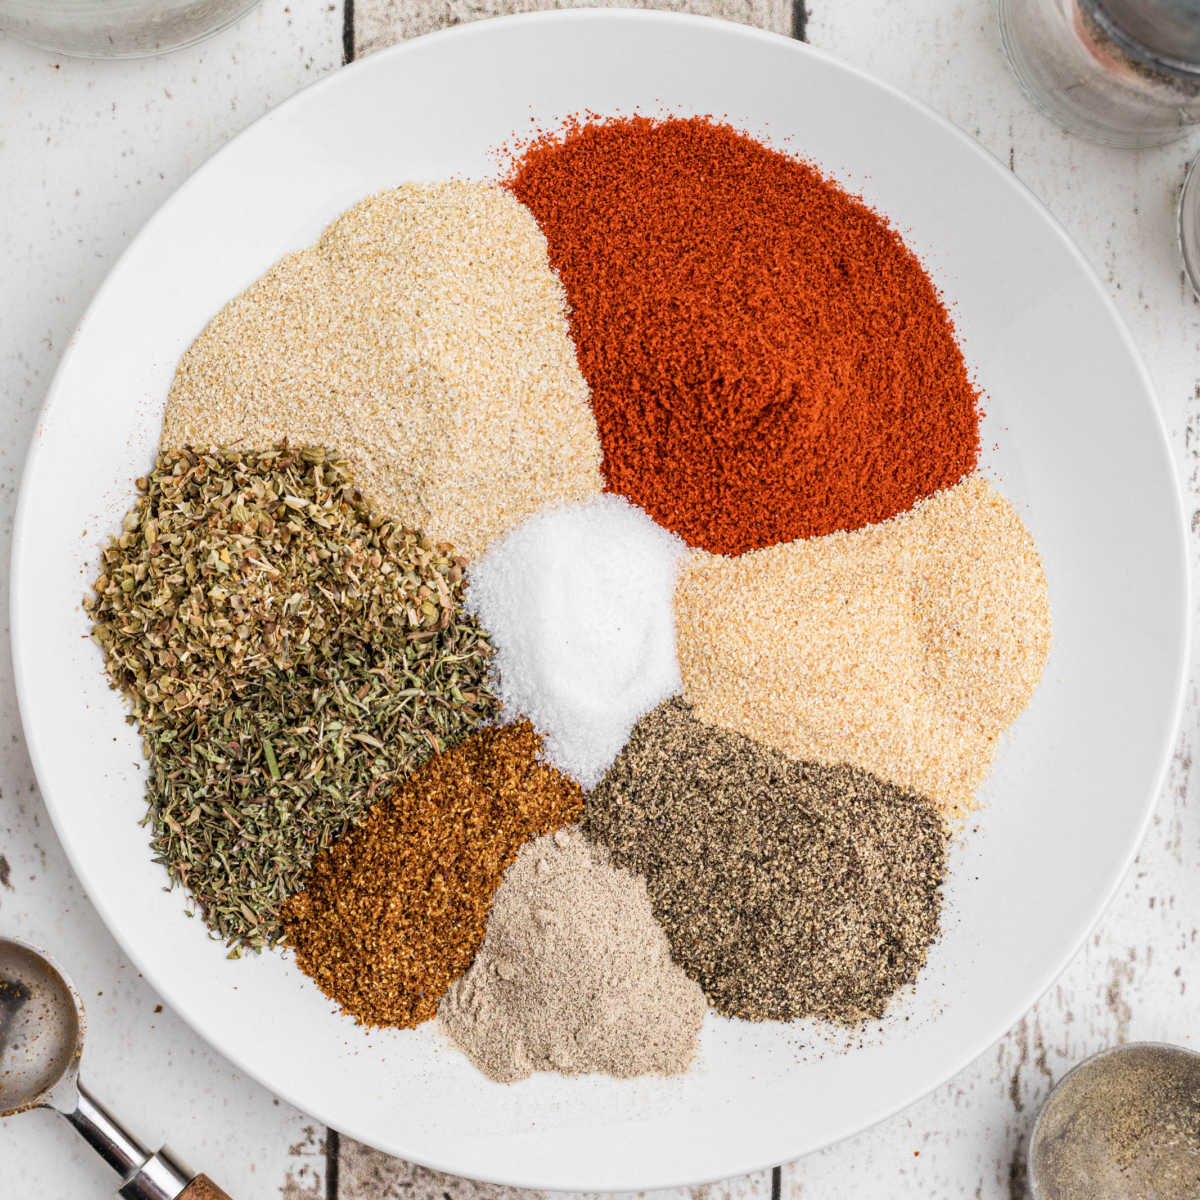 A plate full of arranged seasoning in a circle.